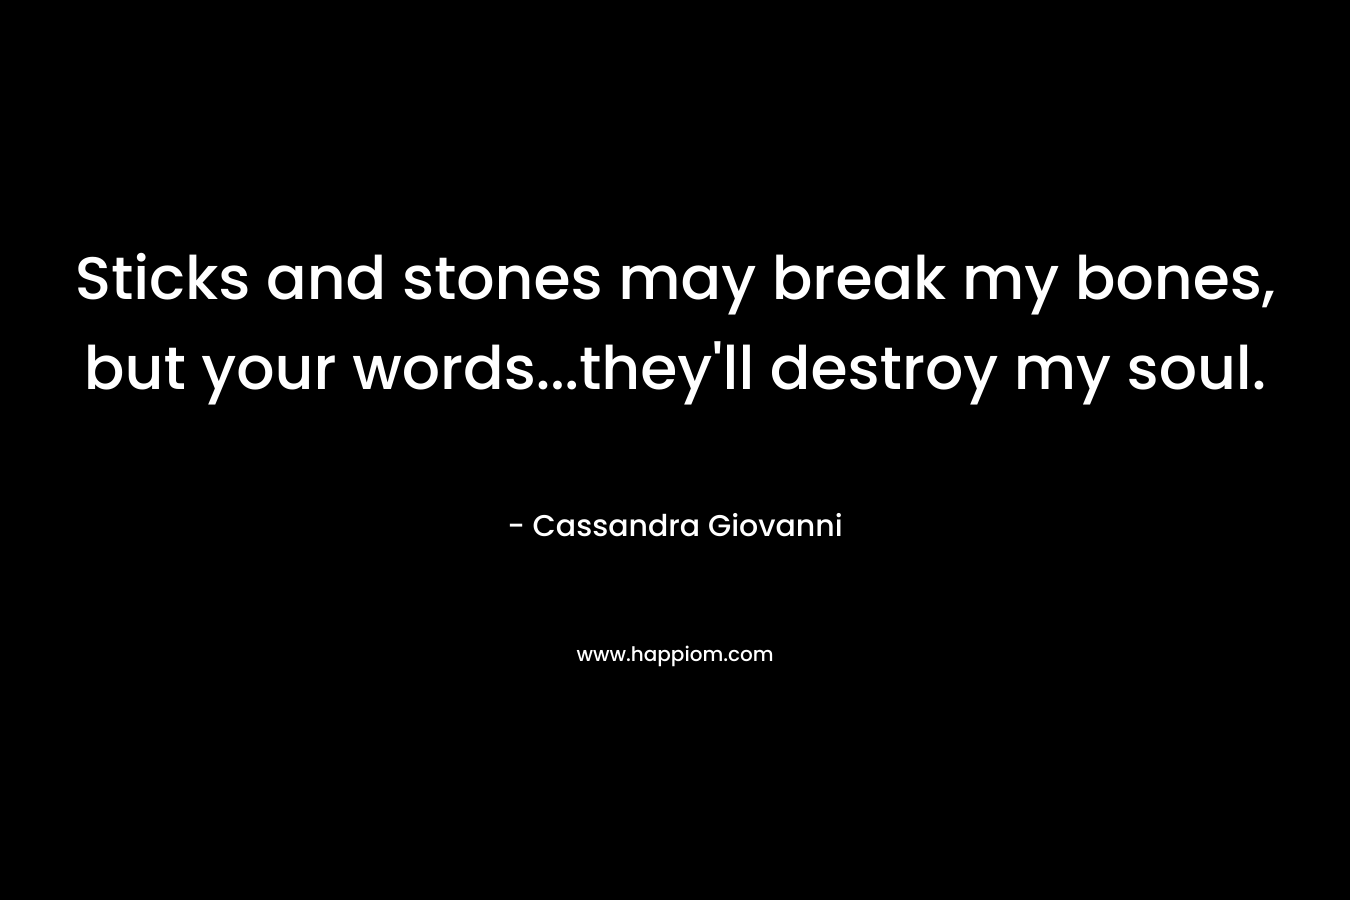 Sticks and stones may break my bones, but your words…they’ll destroy my soul. – Cassandra Giovanni